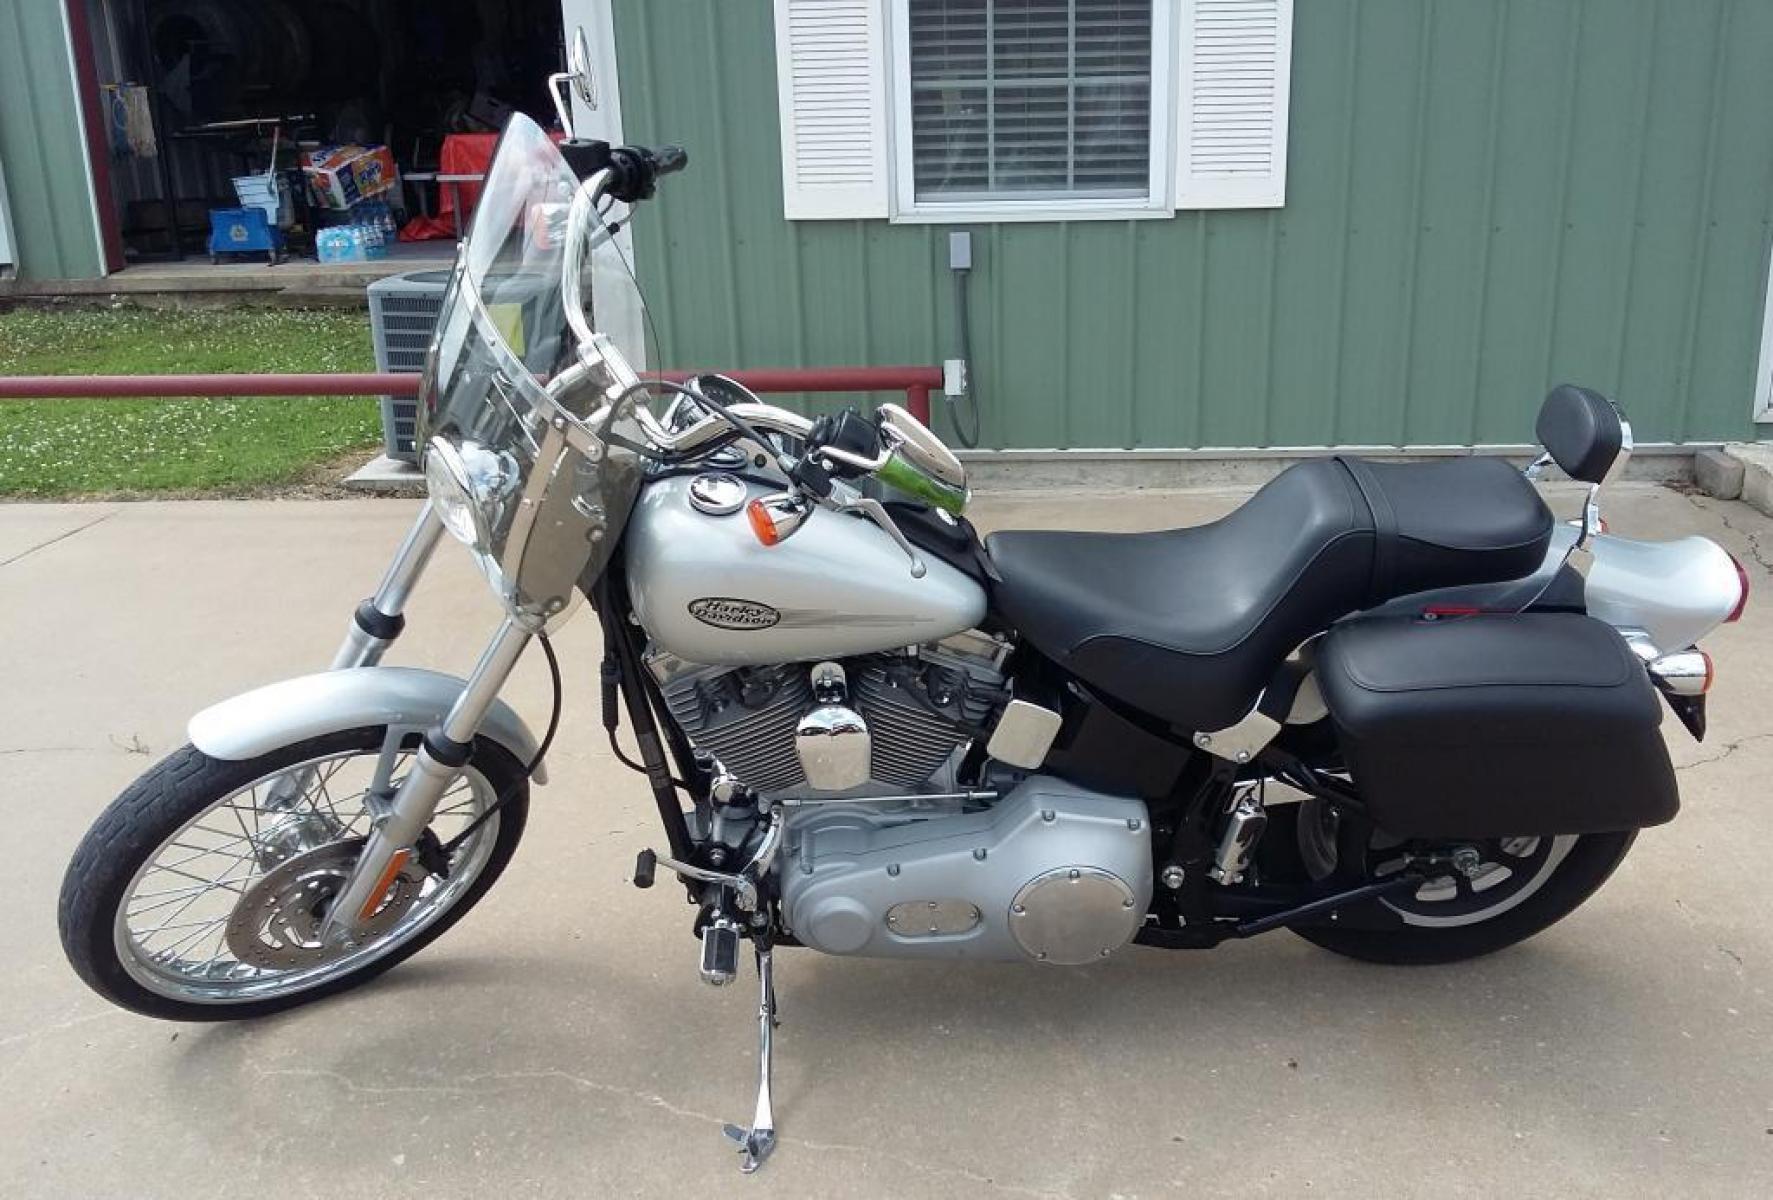 2004 Silver Harley-Davidson FXSTI - (1HD1BVB164Y) with an 1450CC engine, Standard transmission, located at 17760 HWY 62, MORRIS, 74445, 35.609104, -95.877060 - 2004 HARLEY-DAVIDSON FXSTI SOFTAIL STANDARD 1450CC FEATURES HARLEY SADDLEBAGS, AN ACCESSORY BAG ON THE TANK, SILVER POWDER-COATED ENGINE AND COVERS, HARDTAIL STYLING WITH HIDDEN HORIZONTAL REAR SHOCKS, BLACK HORSESHOE OIL TANK, BOBTAIL FENDER, RAKED FRONT FORKS. ALWAYS GARAGE KEPT!! IT'S IN EXCELLE - Photo #0